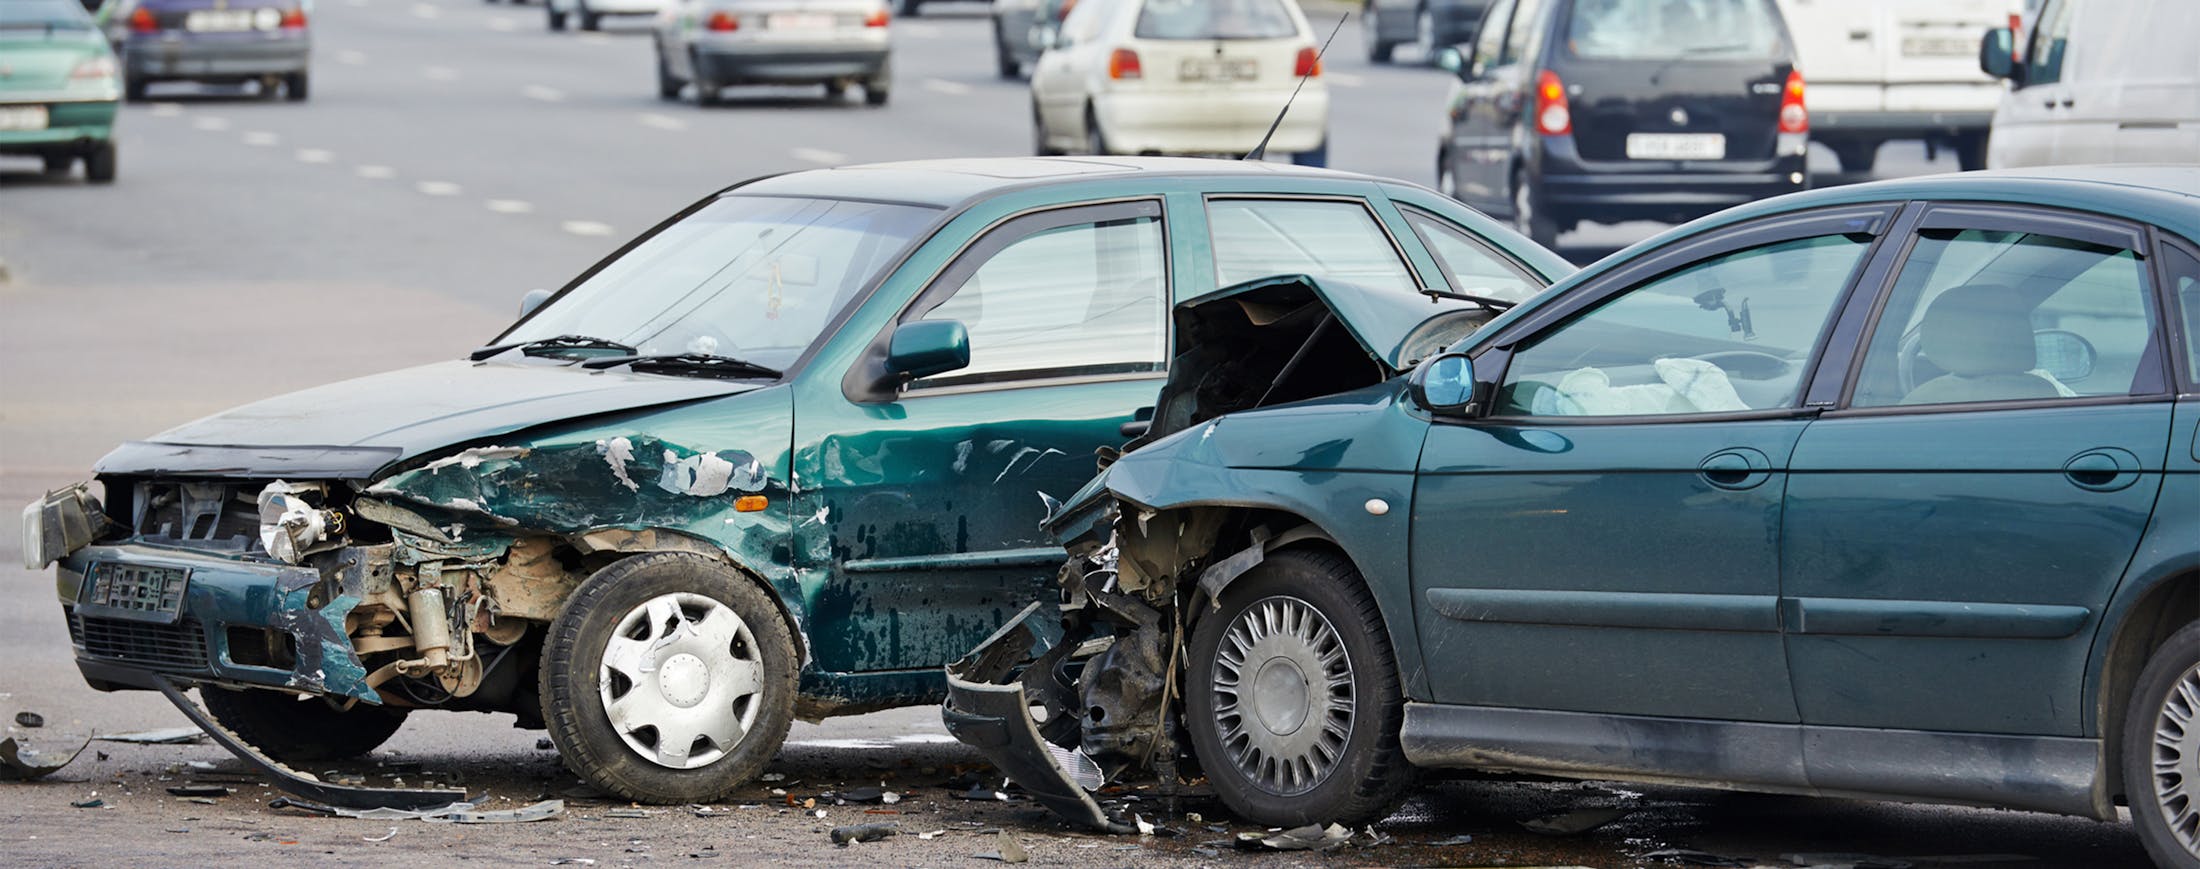 Image of Two Cars that Collided - Motor Vehicle Accident Banner